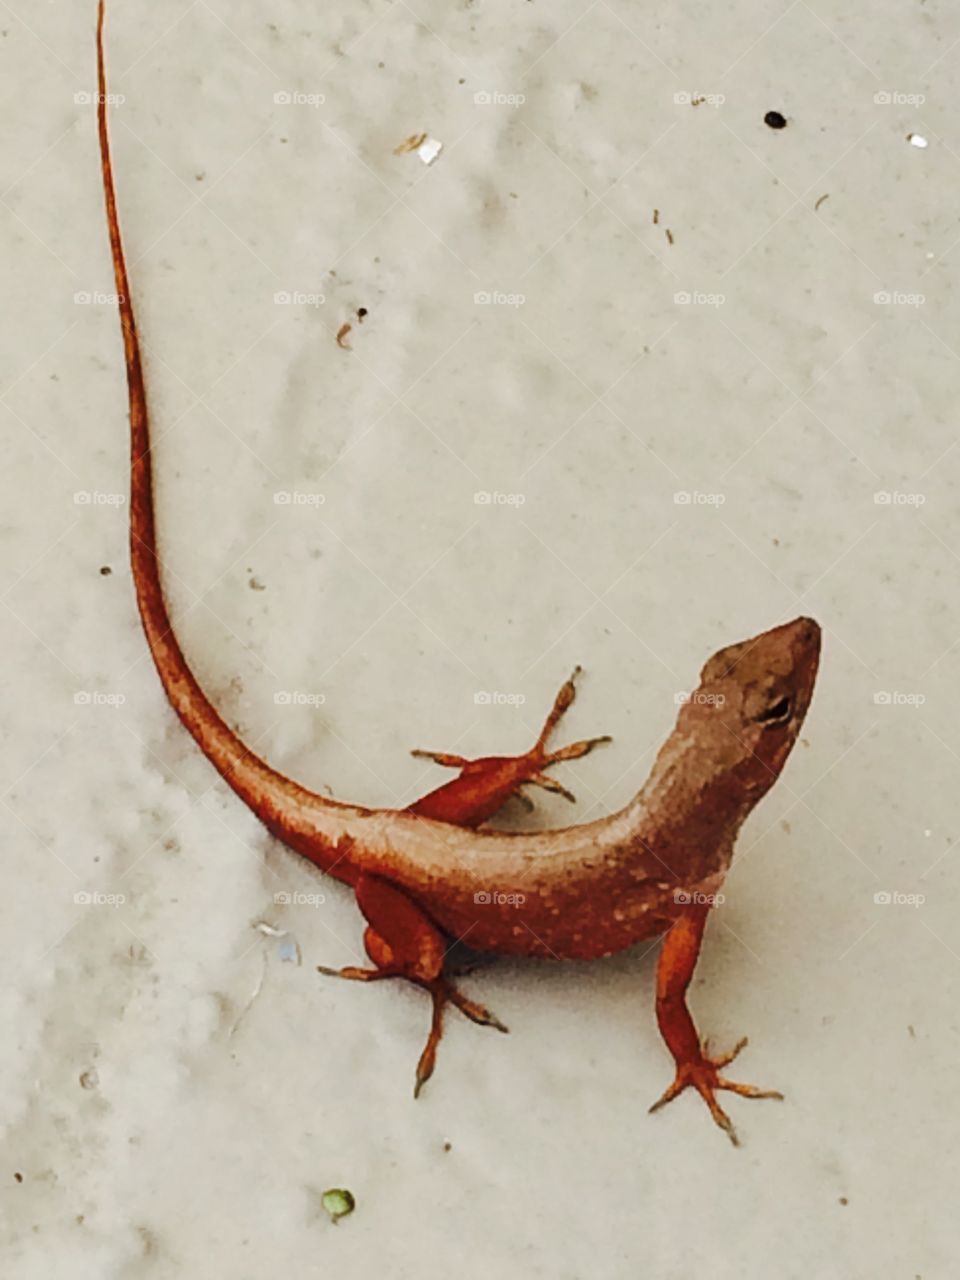 A rare red phase anole lizard